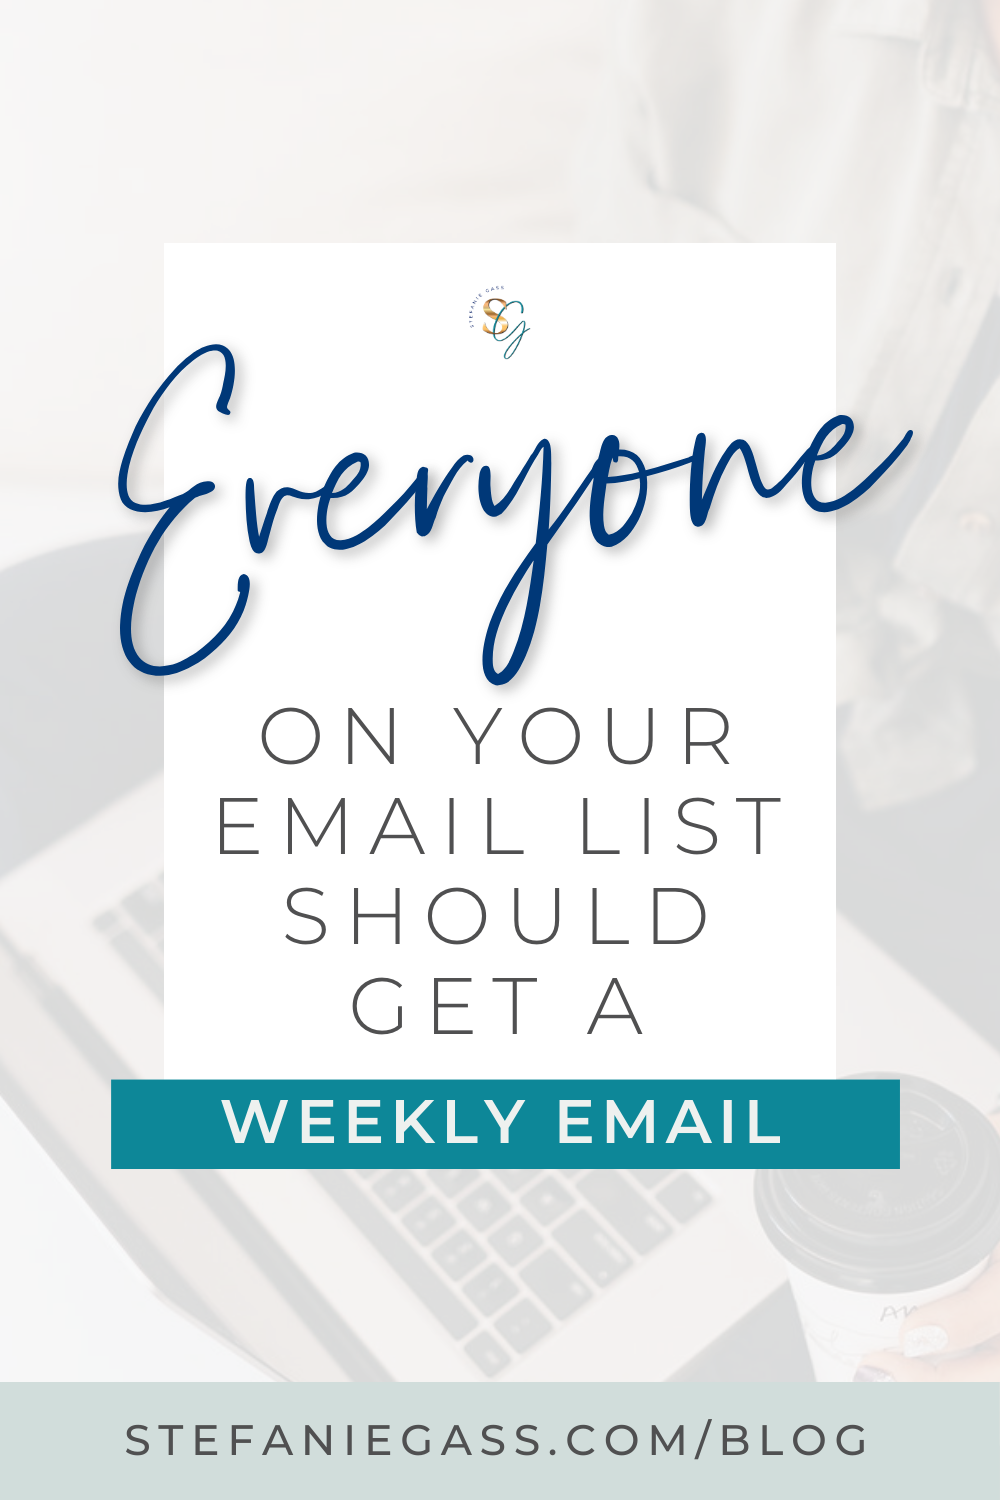 Stefanie Gass Quote:  Everyone on your email list should get a weekly email.